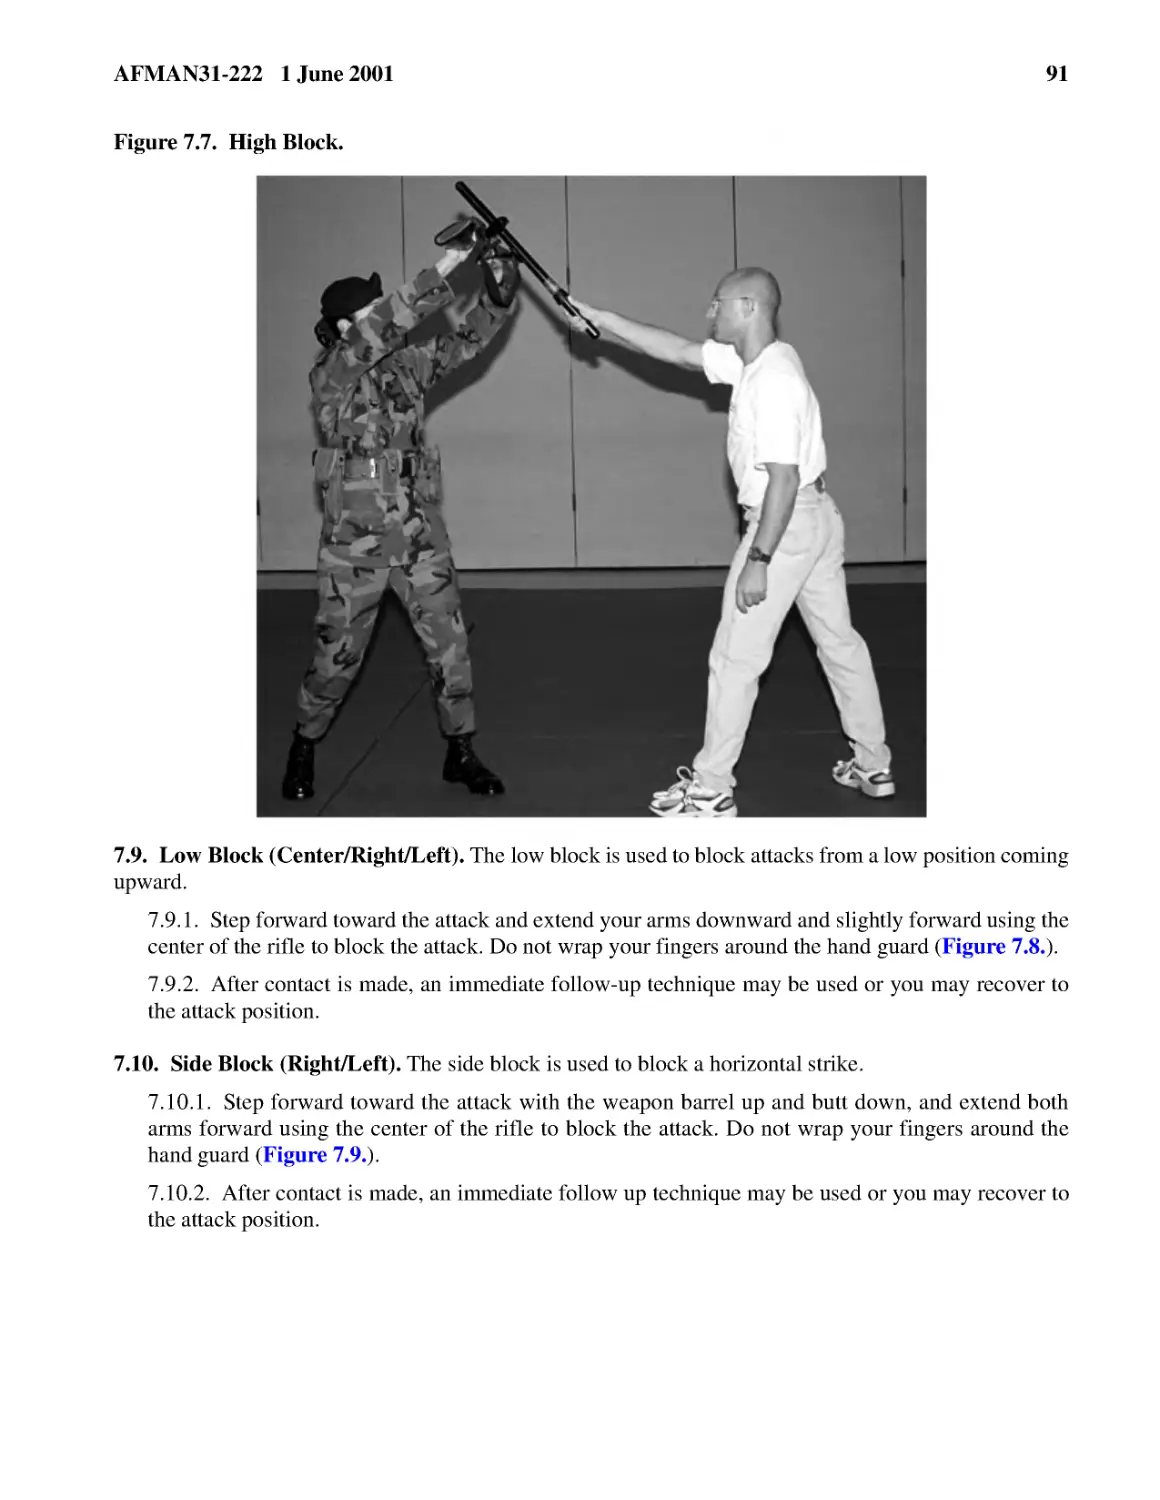 Figure 7.7.� High Block.
7.9.1.� Step forward toward the attack and extend your arms downward and slightly forward using t...
7.9.2.� After contact is made, an immediate follow-up technique may be used or you may recover to...
7.10.1.� Step forward toward the attack with the weapon barrel up and butt down, and extend both ...
7.10.2.� After contact is made, an immediate follow up technique may be used or you may recover t...